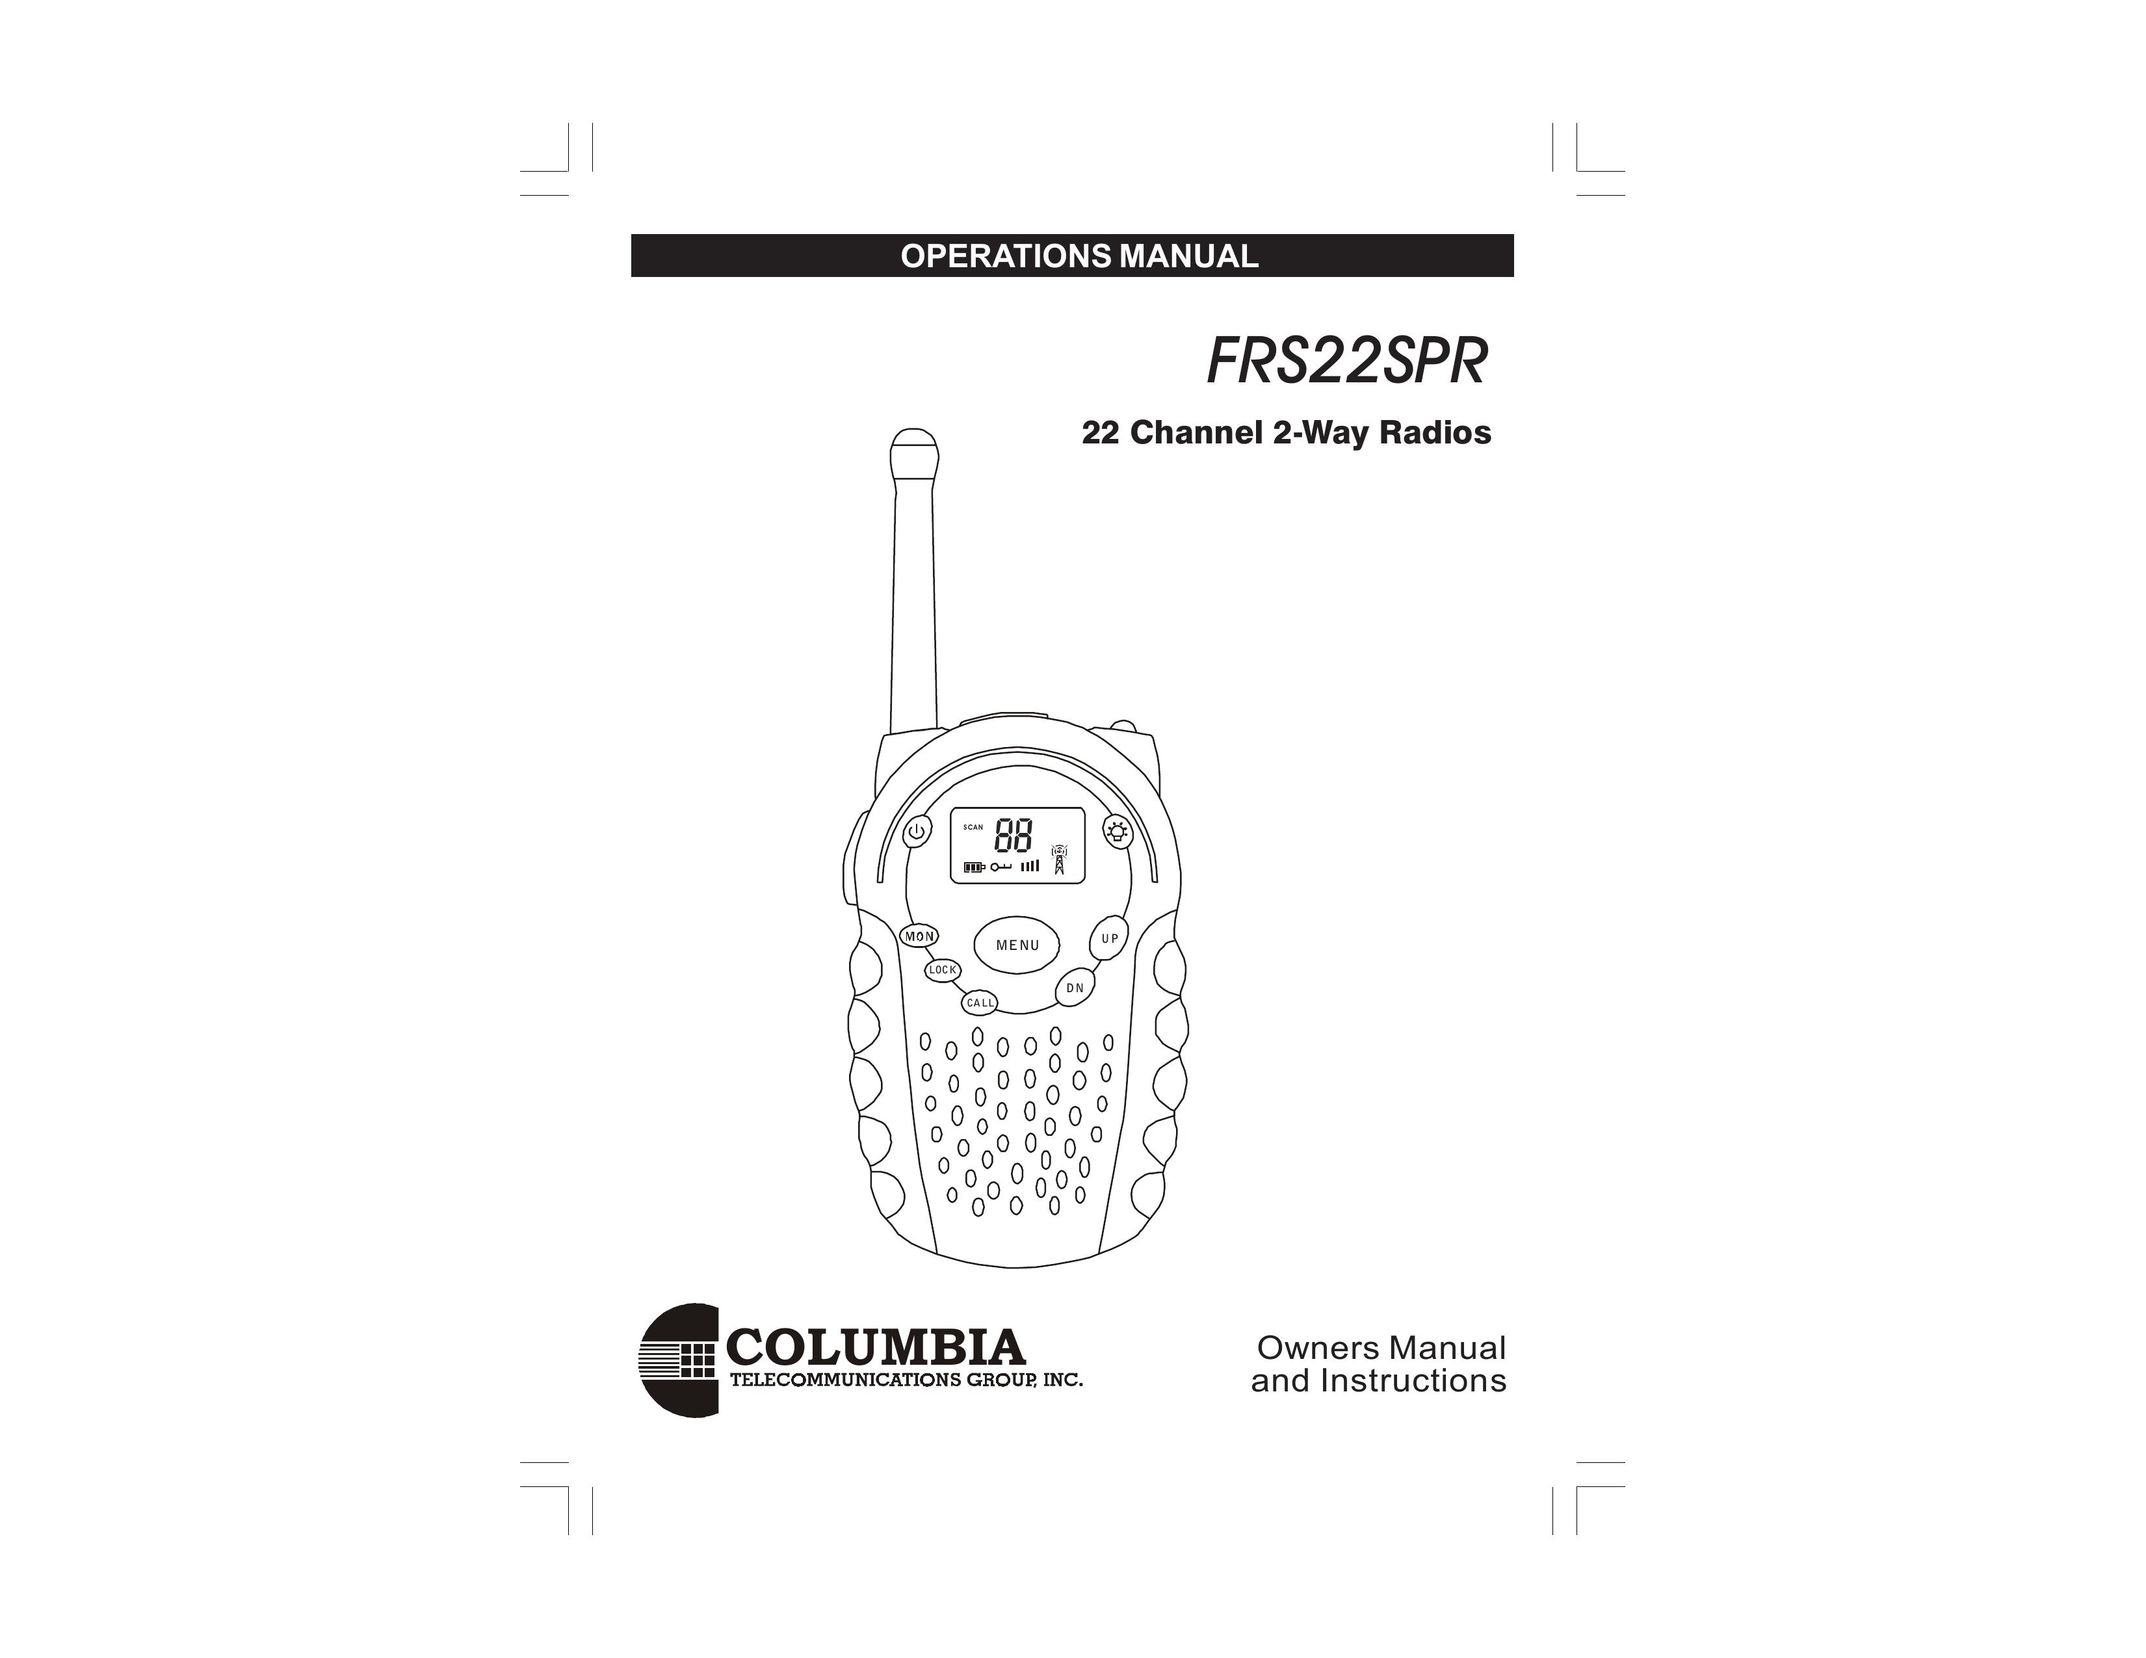 Columbian Home Products FRS22SPR Two-Way Radio User Manual